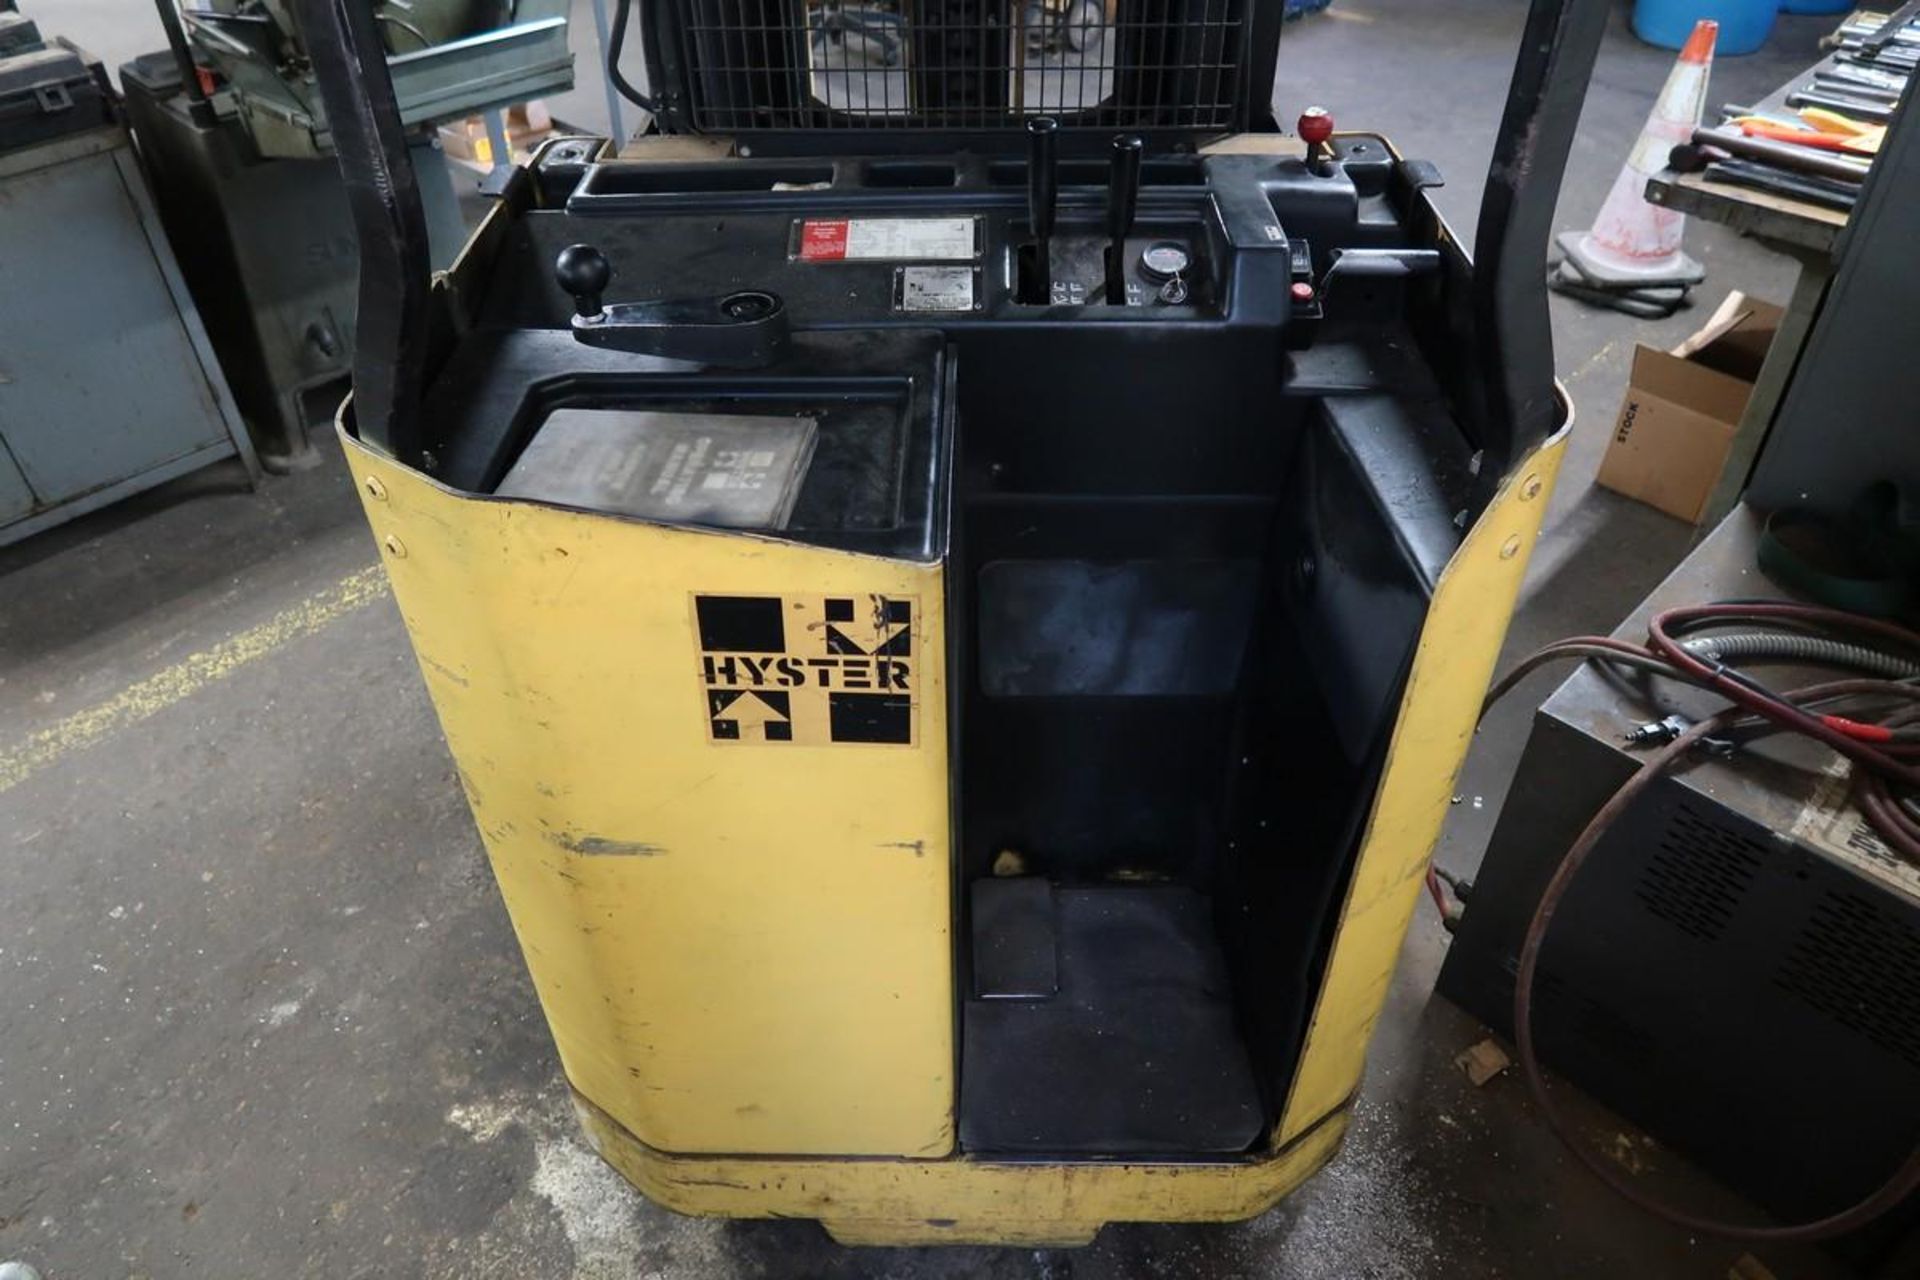 Hyster N40ER 24V Electric Stand-Up Fork Lift Reach Truck - Image 5 of 8